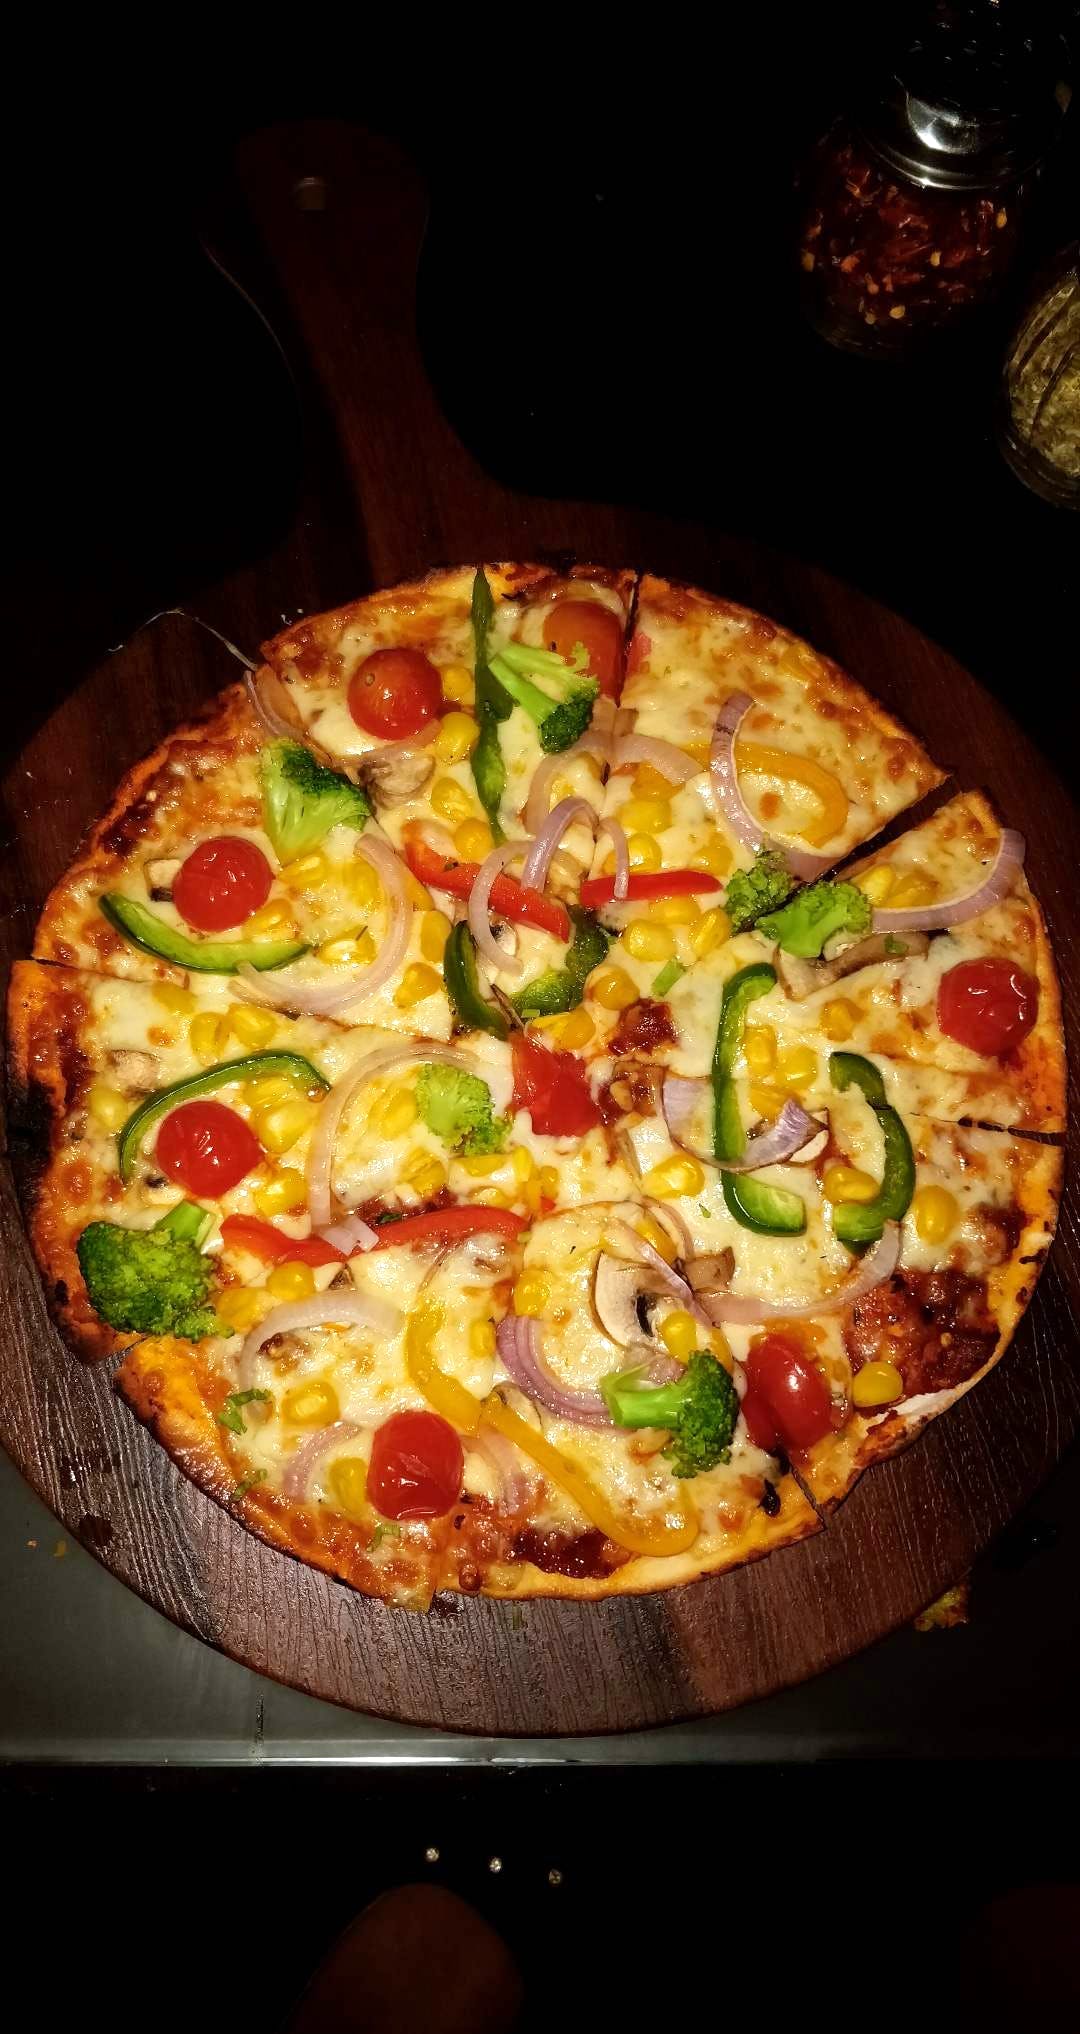 Dish,Food,Pizza,Cuisine,Pizza cheese,California-style pizza,Ingredient,Flatbread,Fast food,Junk food